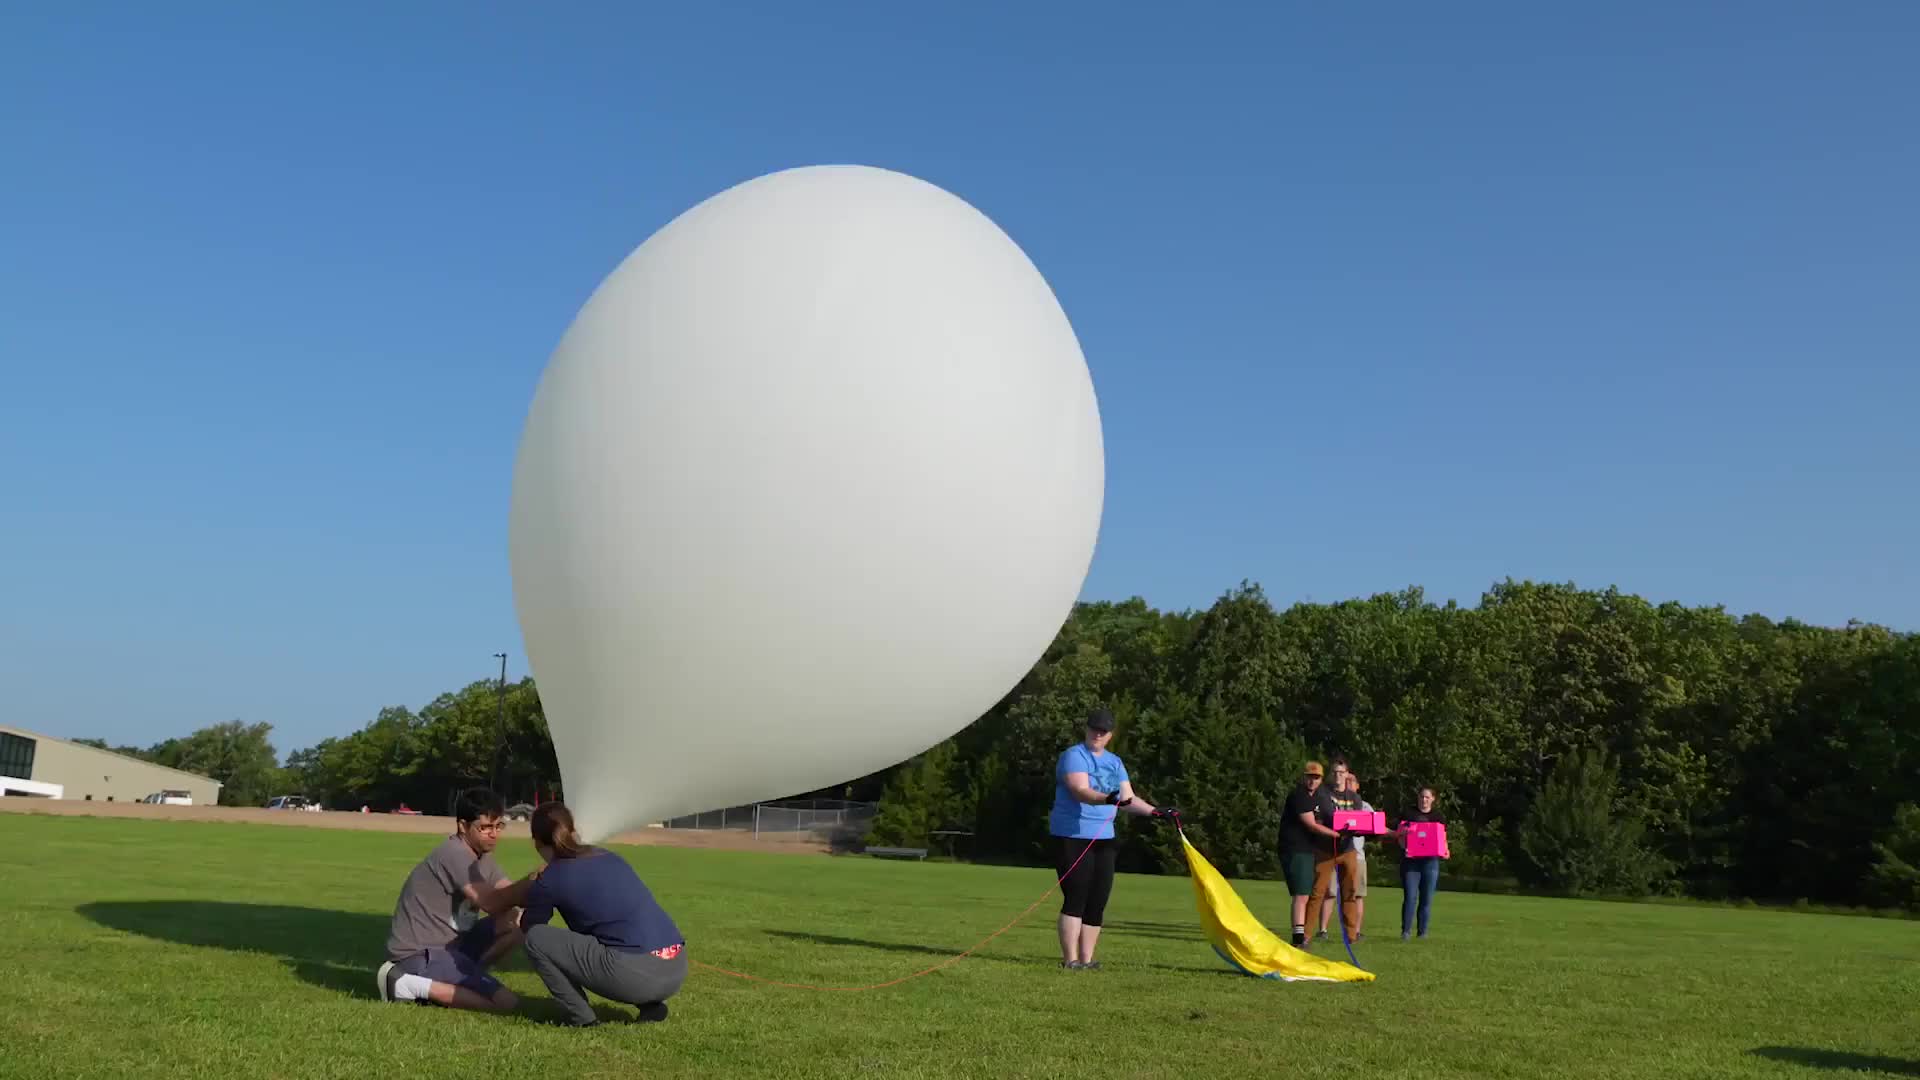 students launching a weather balloon against a blue sky